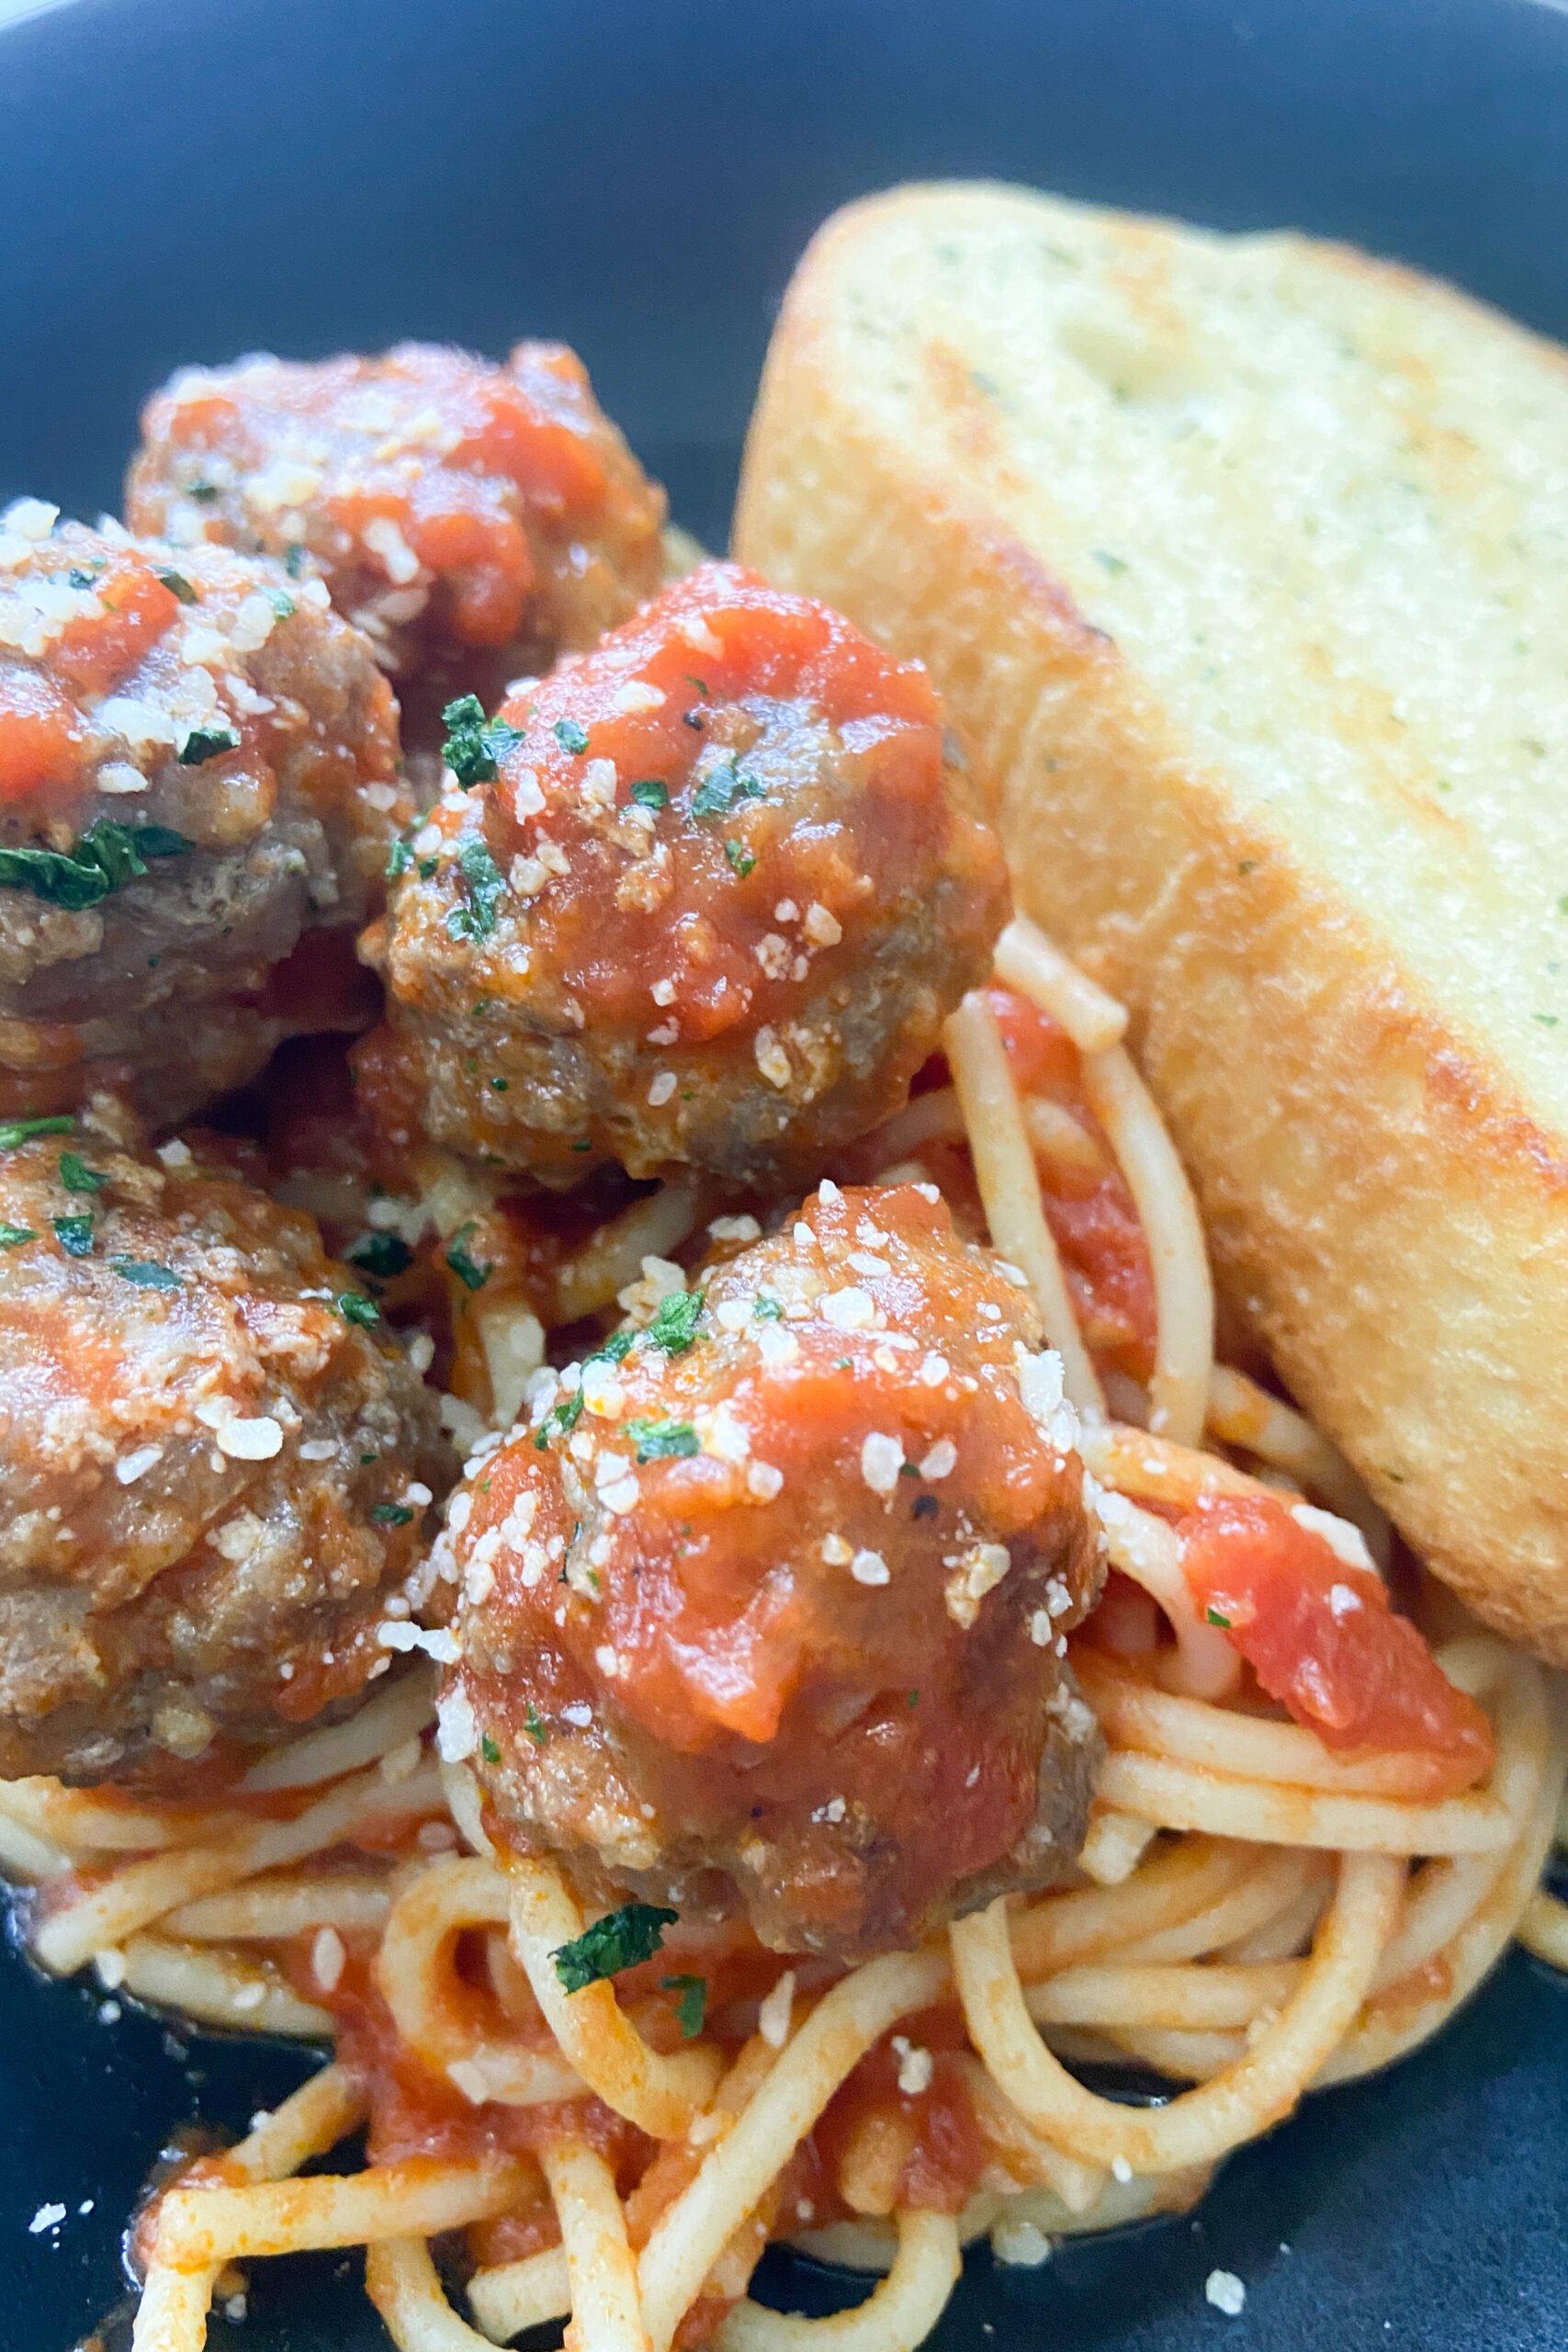 Meatballs served with spaghetti and garlic bread.